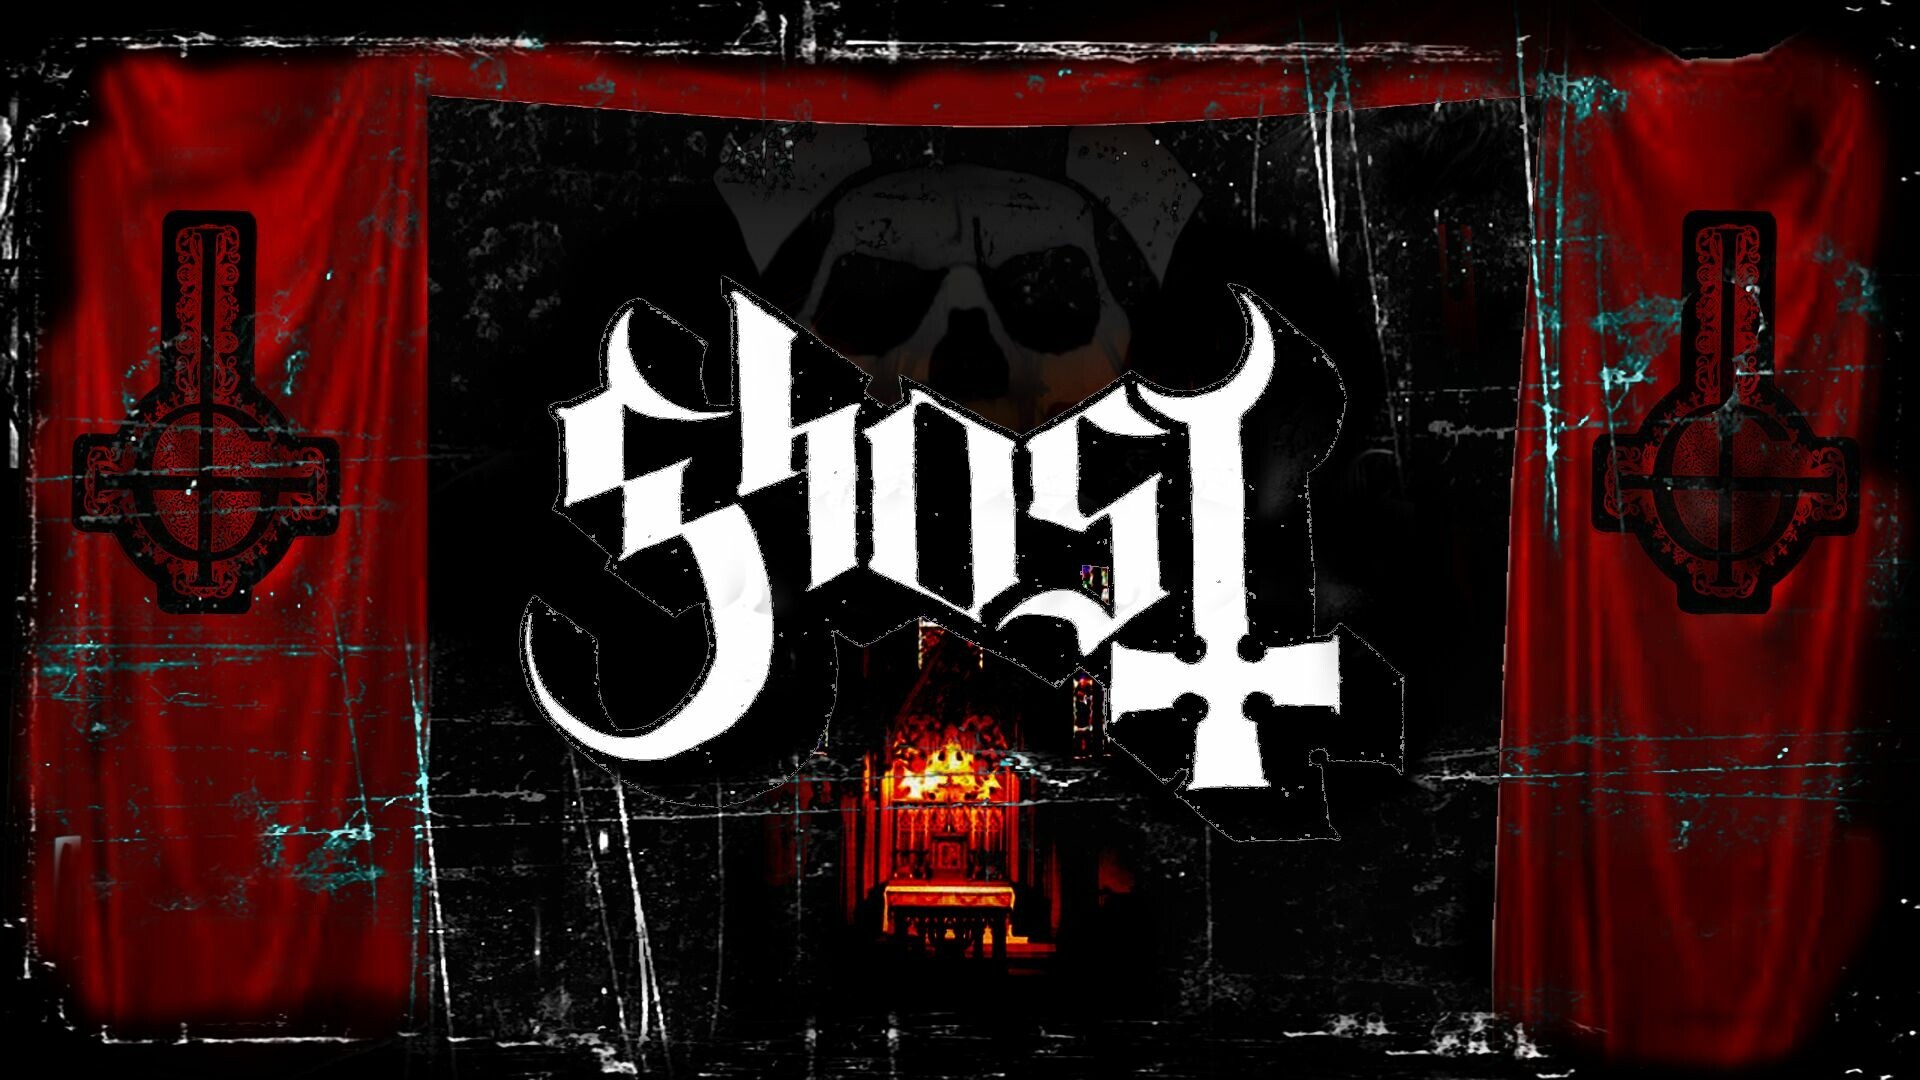 Ghost (Band): "Rats" peaked at number one on the Billboard Mainstream Rock Songs chart. 1920x1080 Full HD Background.